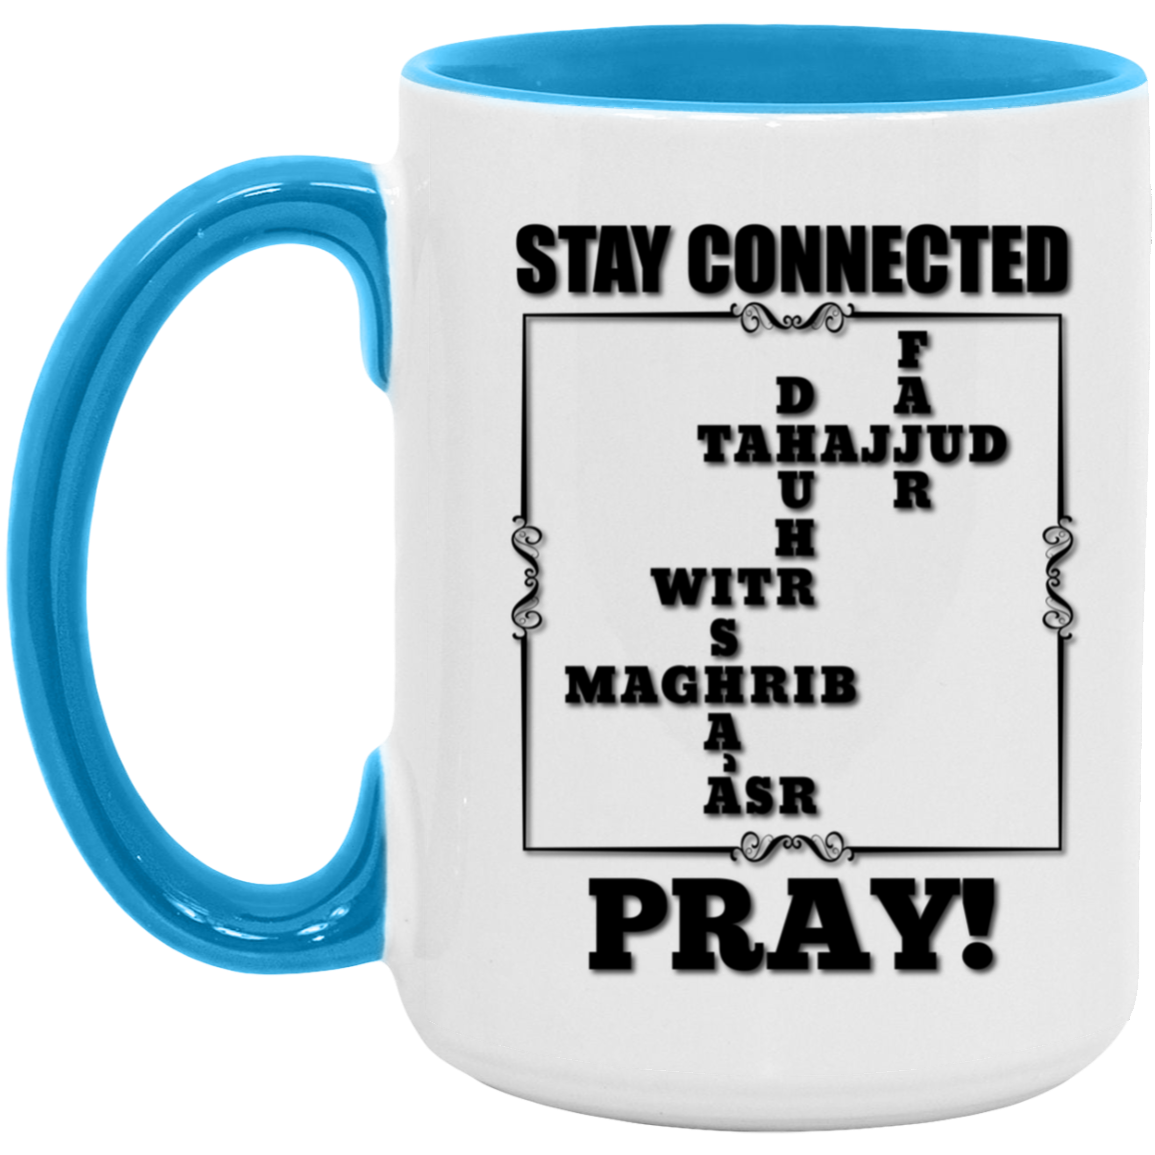 STAY CONNECTED PRAY! PRAYER NAMES 15oz. Accent Mug (MORE COLORS)